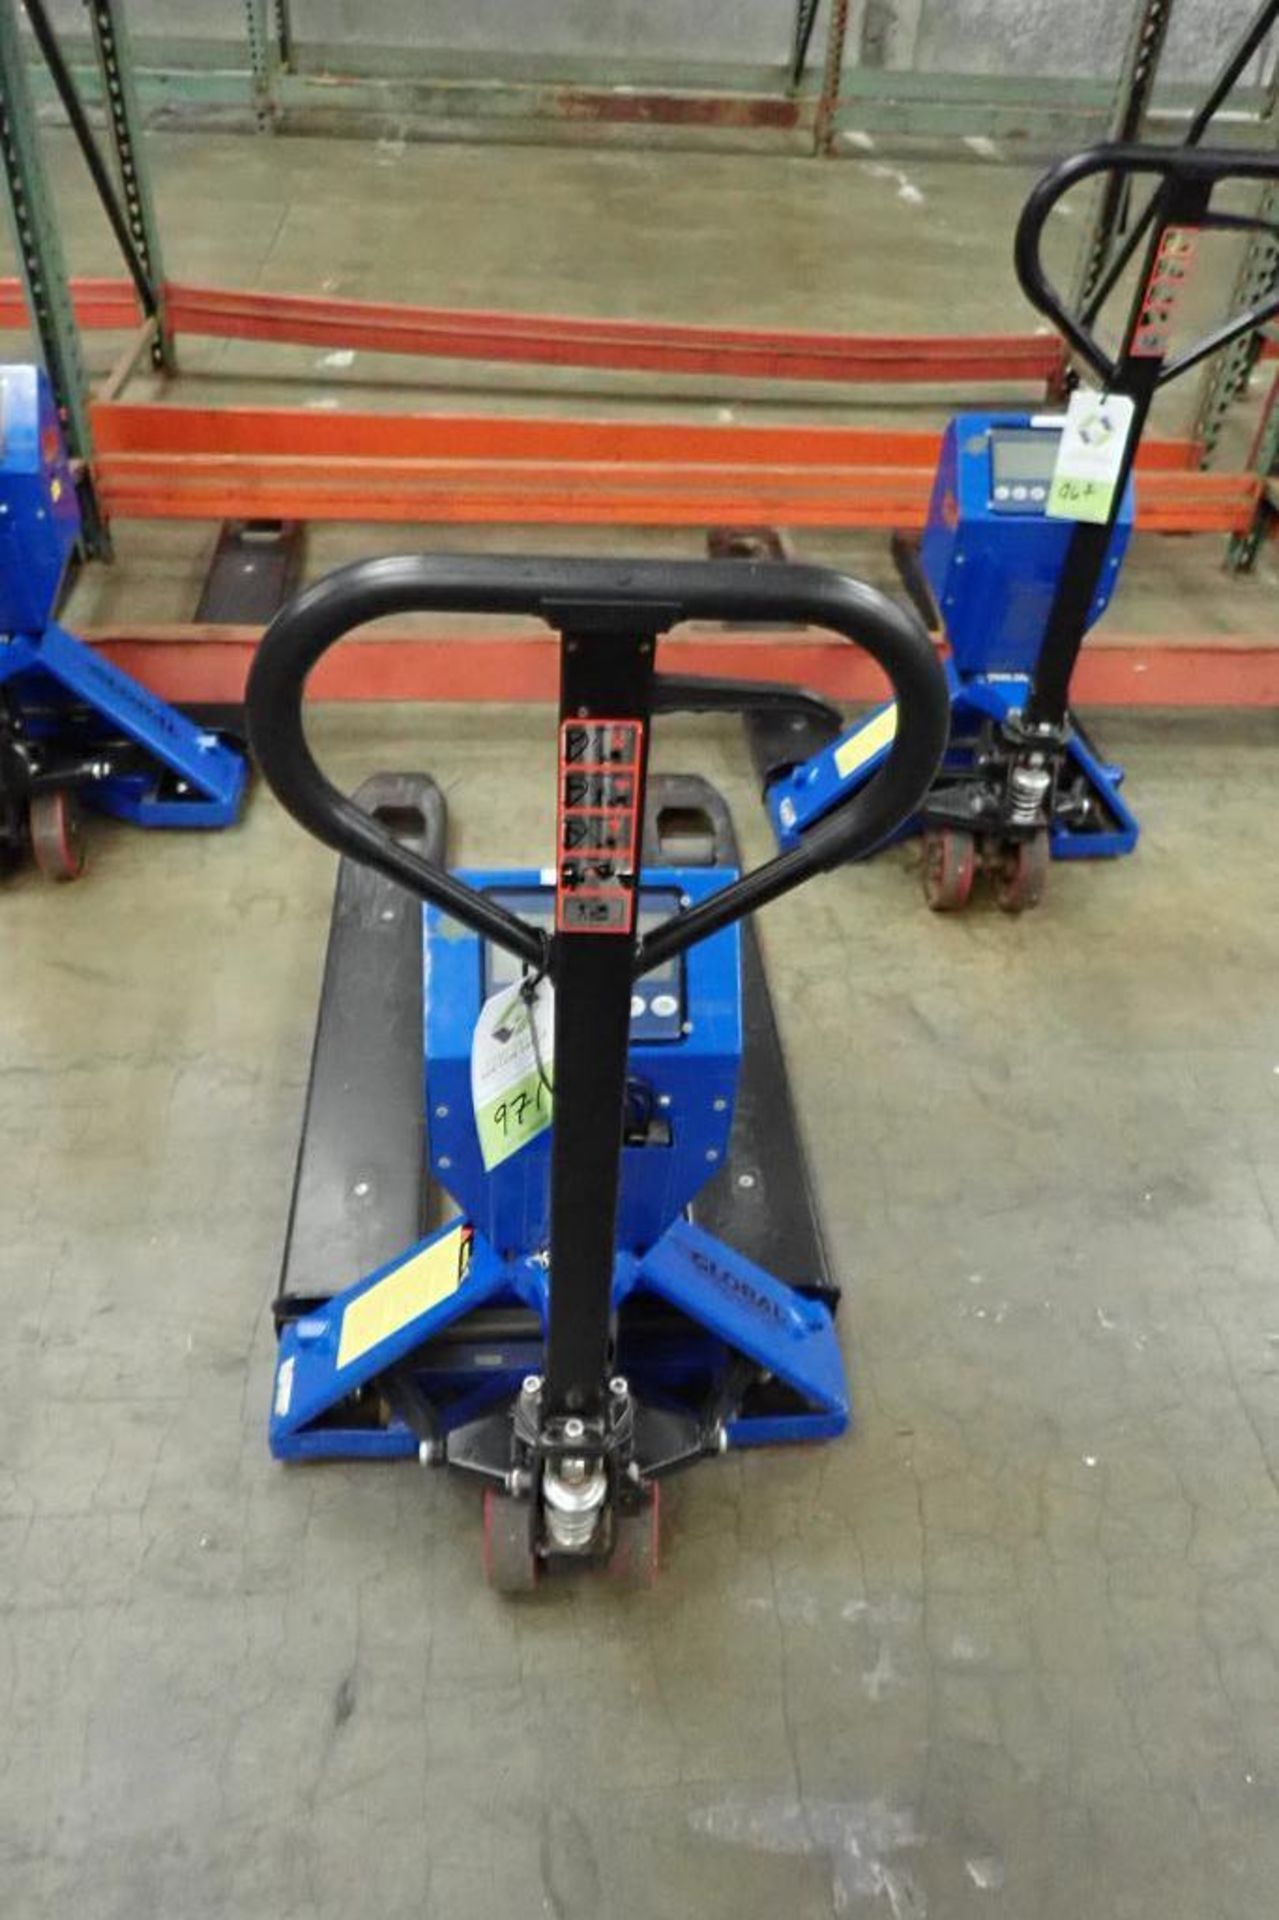 Global Industrial hand pallet jack, SN 377843, with Mettler Toledo on board scale, 5000 lb capacity, - Image 2 of 6